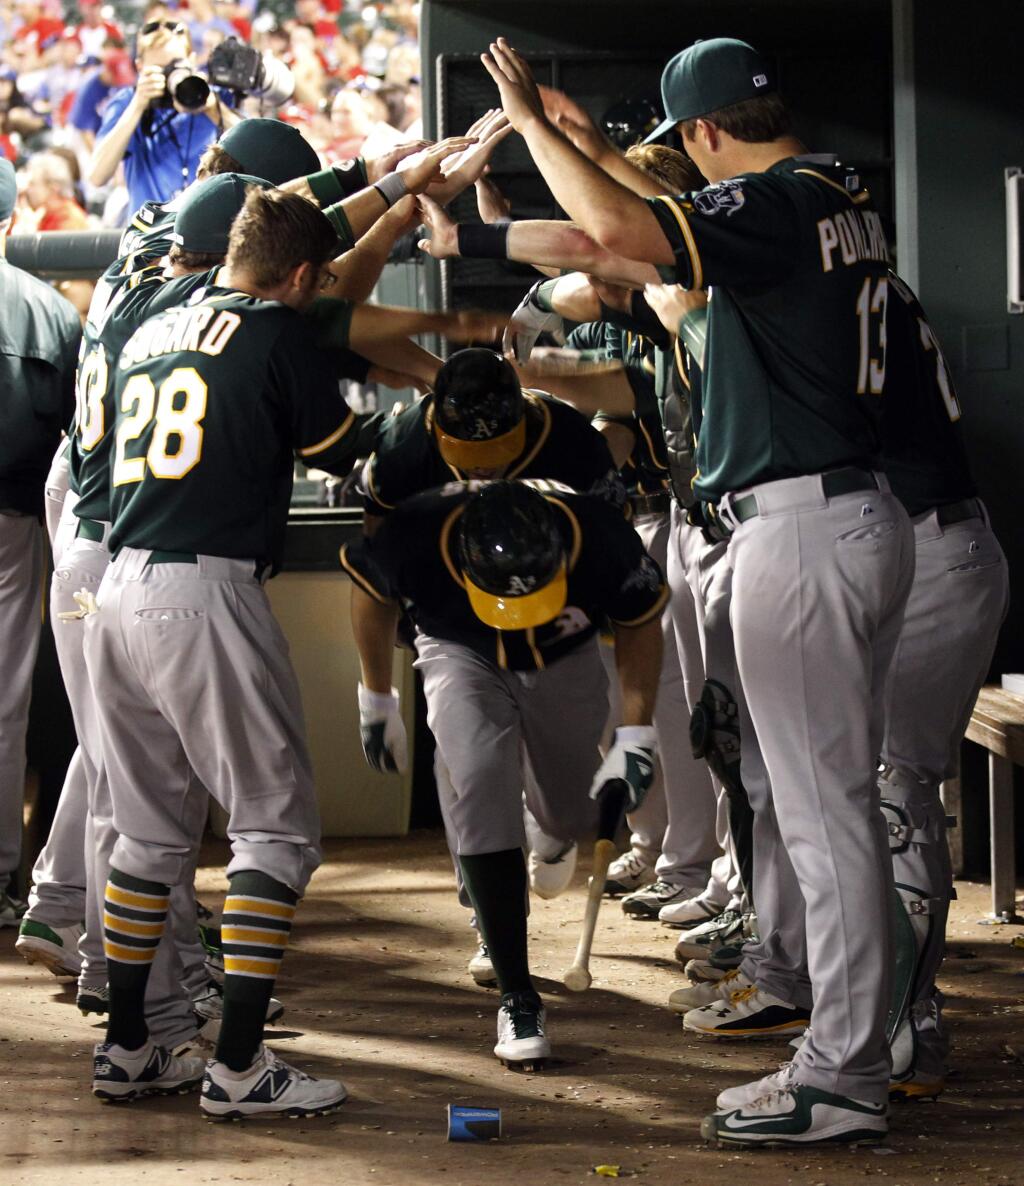 Oakland Athletics Billy Burns, front, and Marcus Semien celebrate with teammates after both scored on a hit by Josh Reddick against the Texas Rangers in the seventh inning of a baseball game Saturday, May 2, 2015, in Arlington, Texas. (AP Photo/Mike Stone)